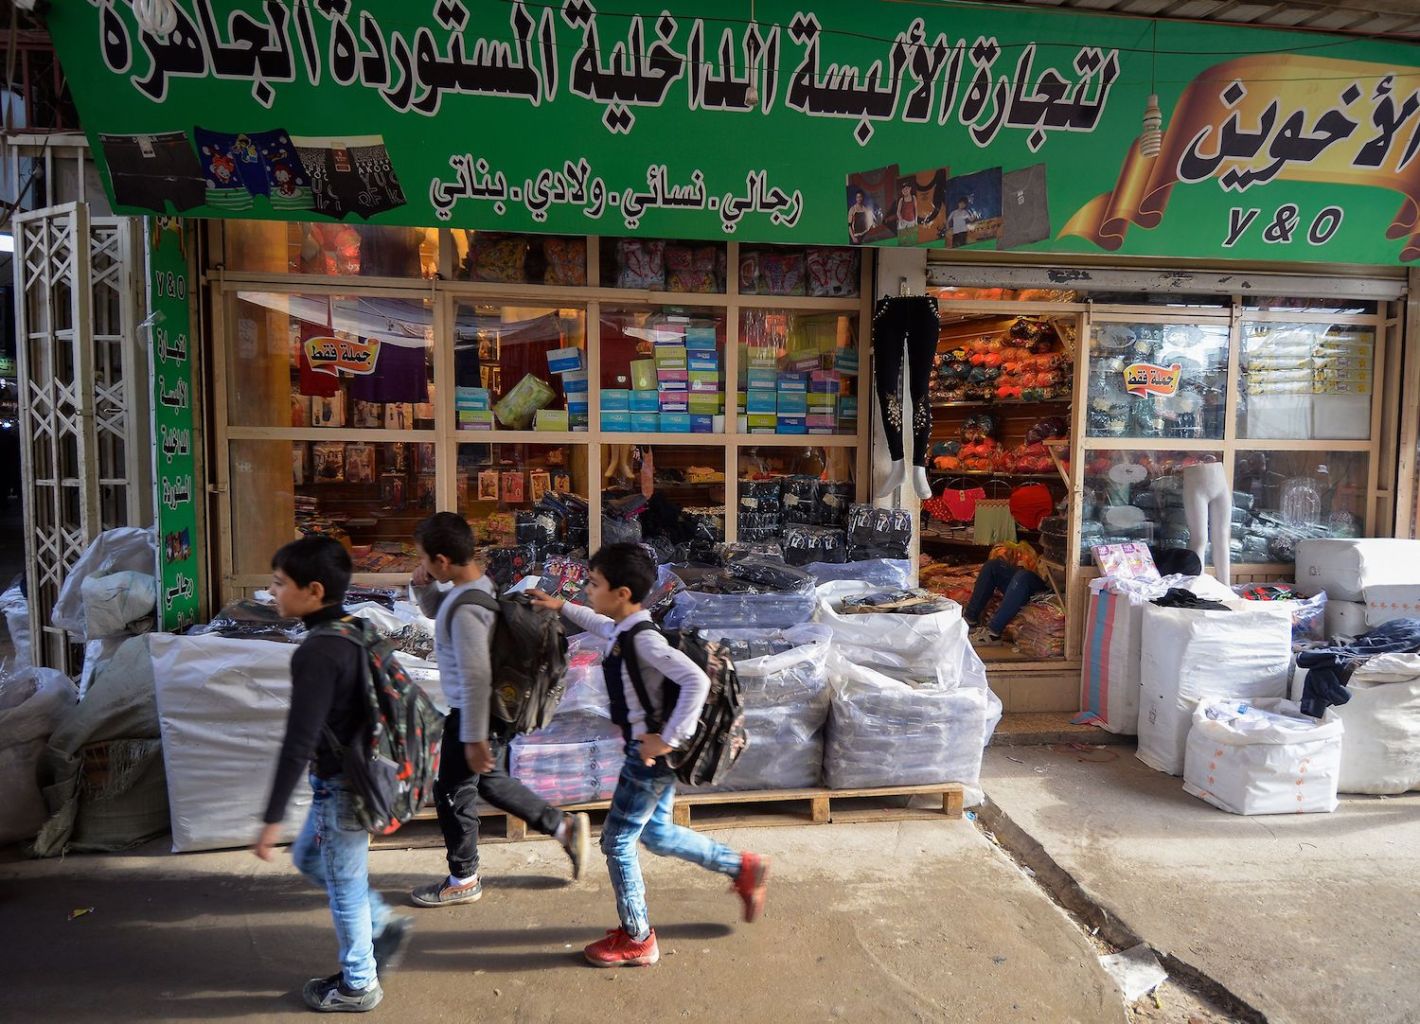 Iraqi boys walk past a shop in a local market in the northern city of Mosul on Nov. 21. ( Zaid al-Obeidi/AFP/Getty Images)